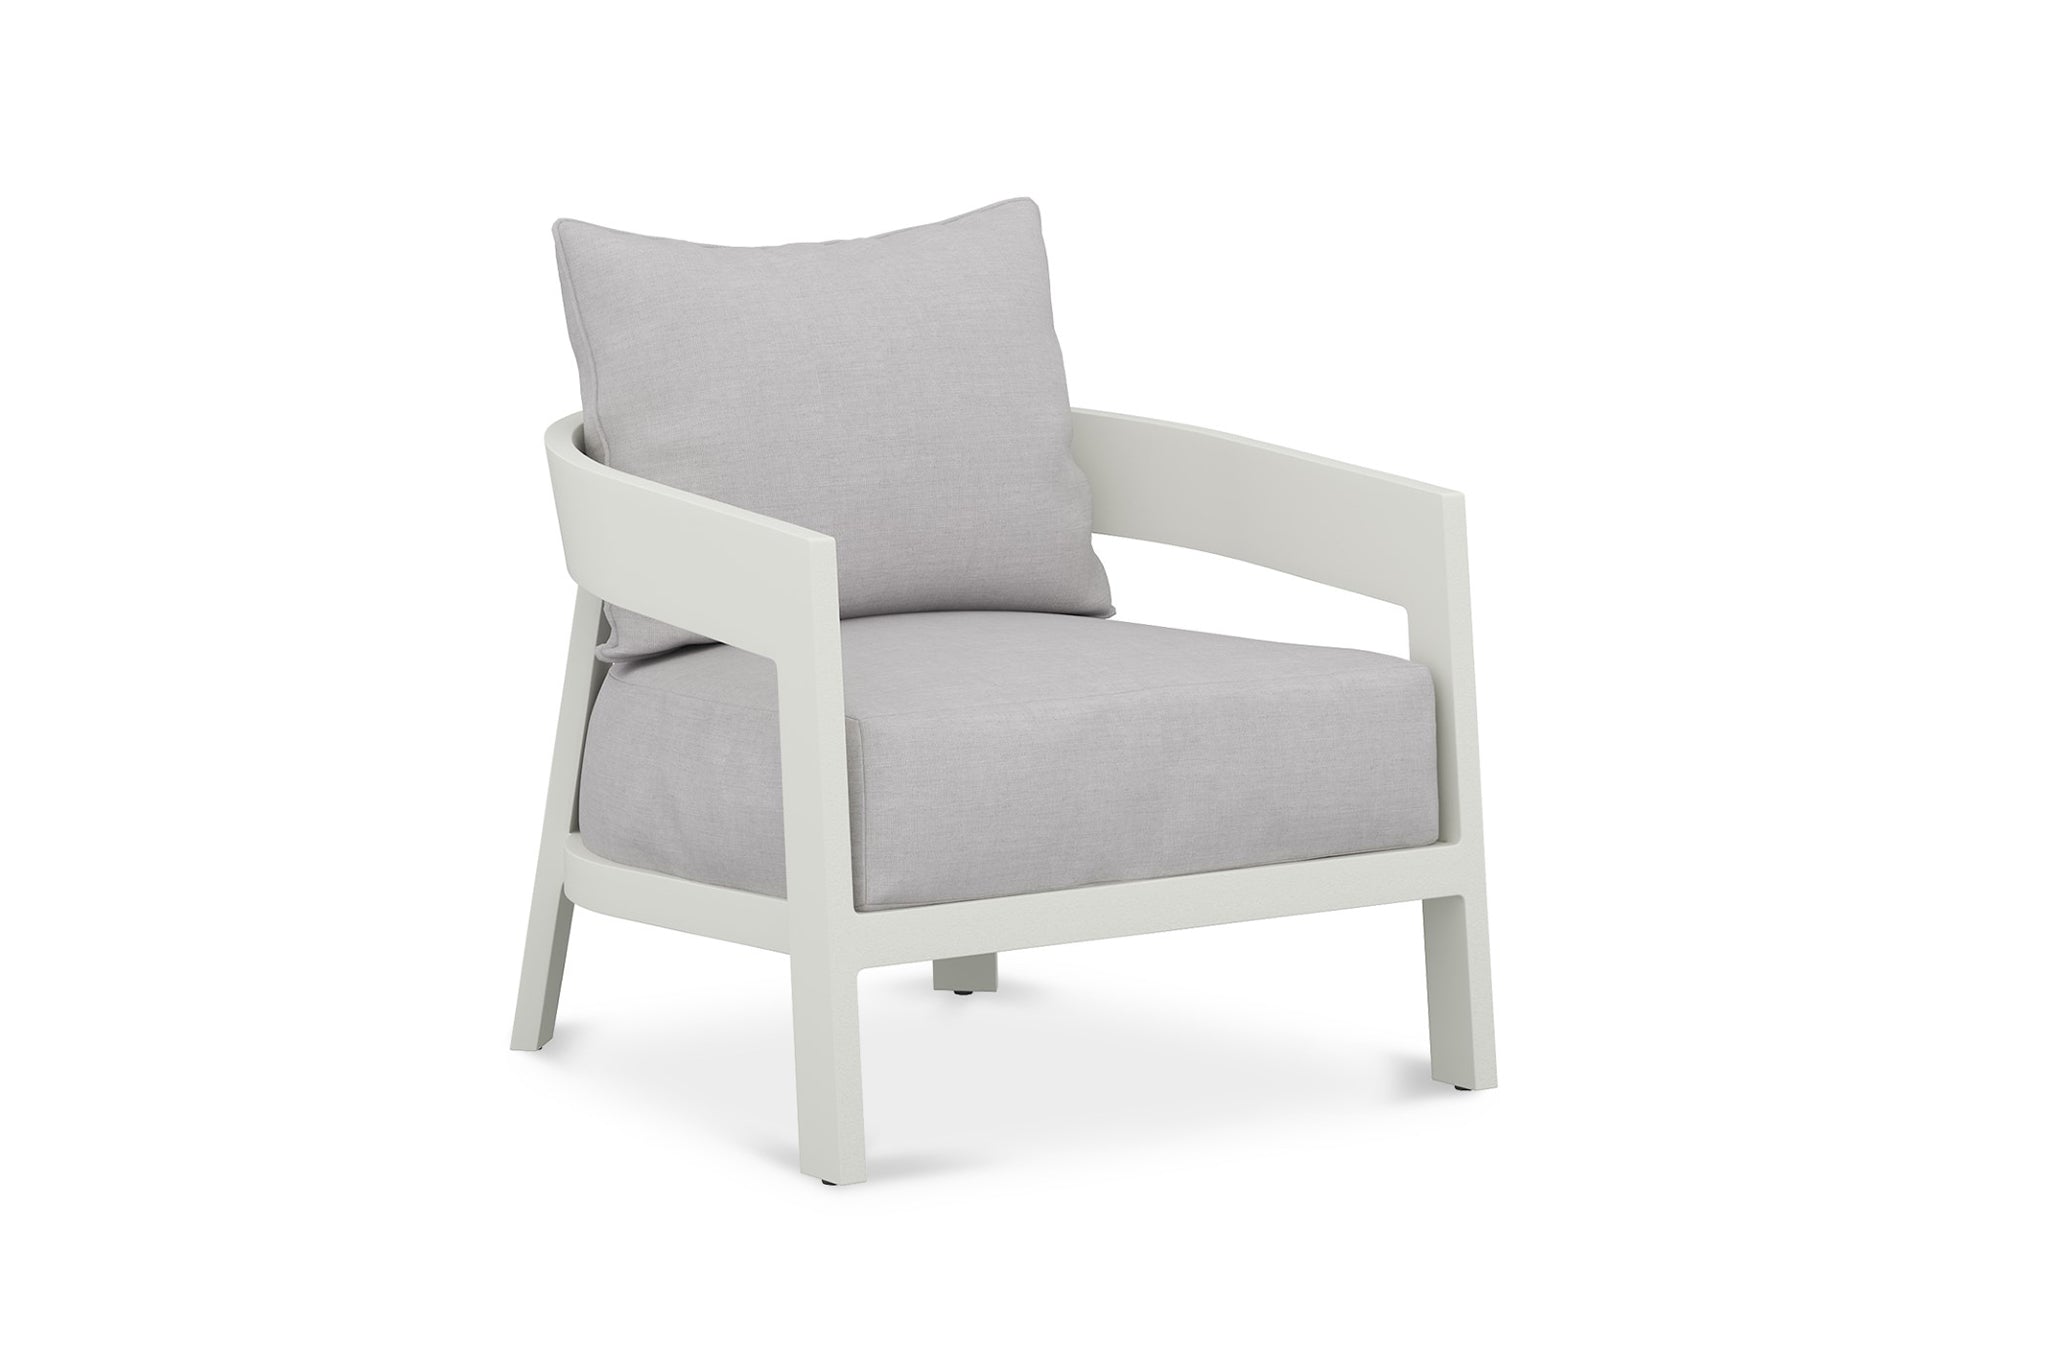 Queenscliff Outdoor Sofa – 1 Seater – White Powder Coated Frame